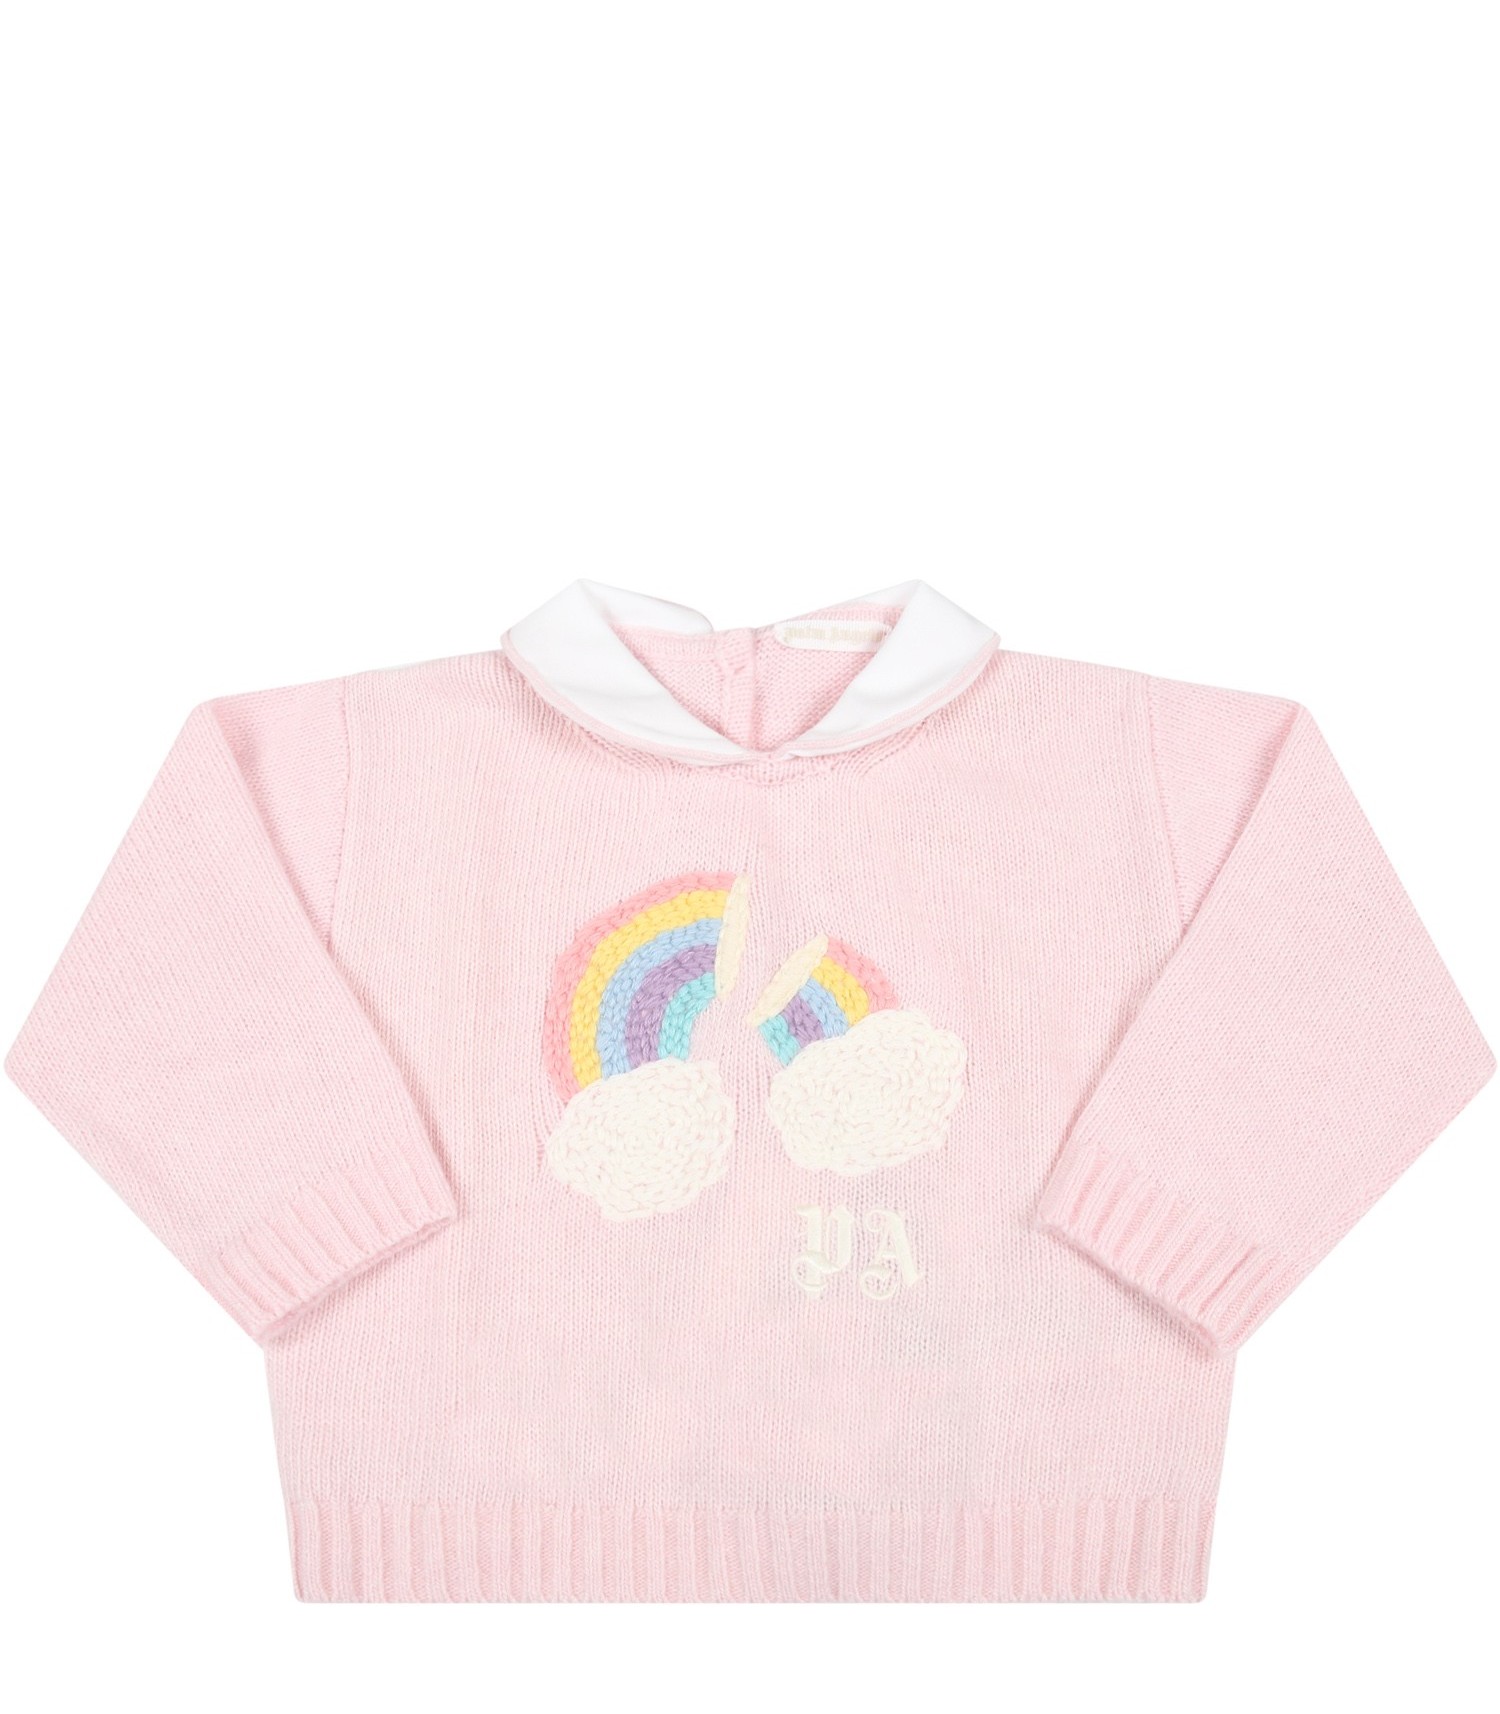 Palm Angels Pink sweater for baby girl with rainbow and logo